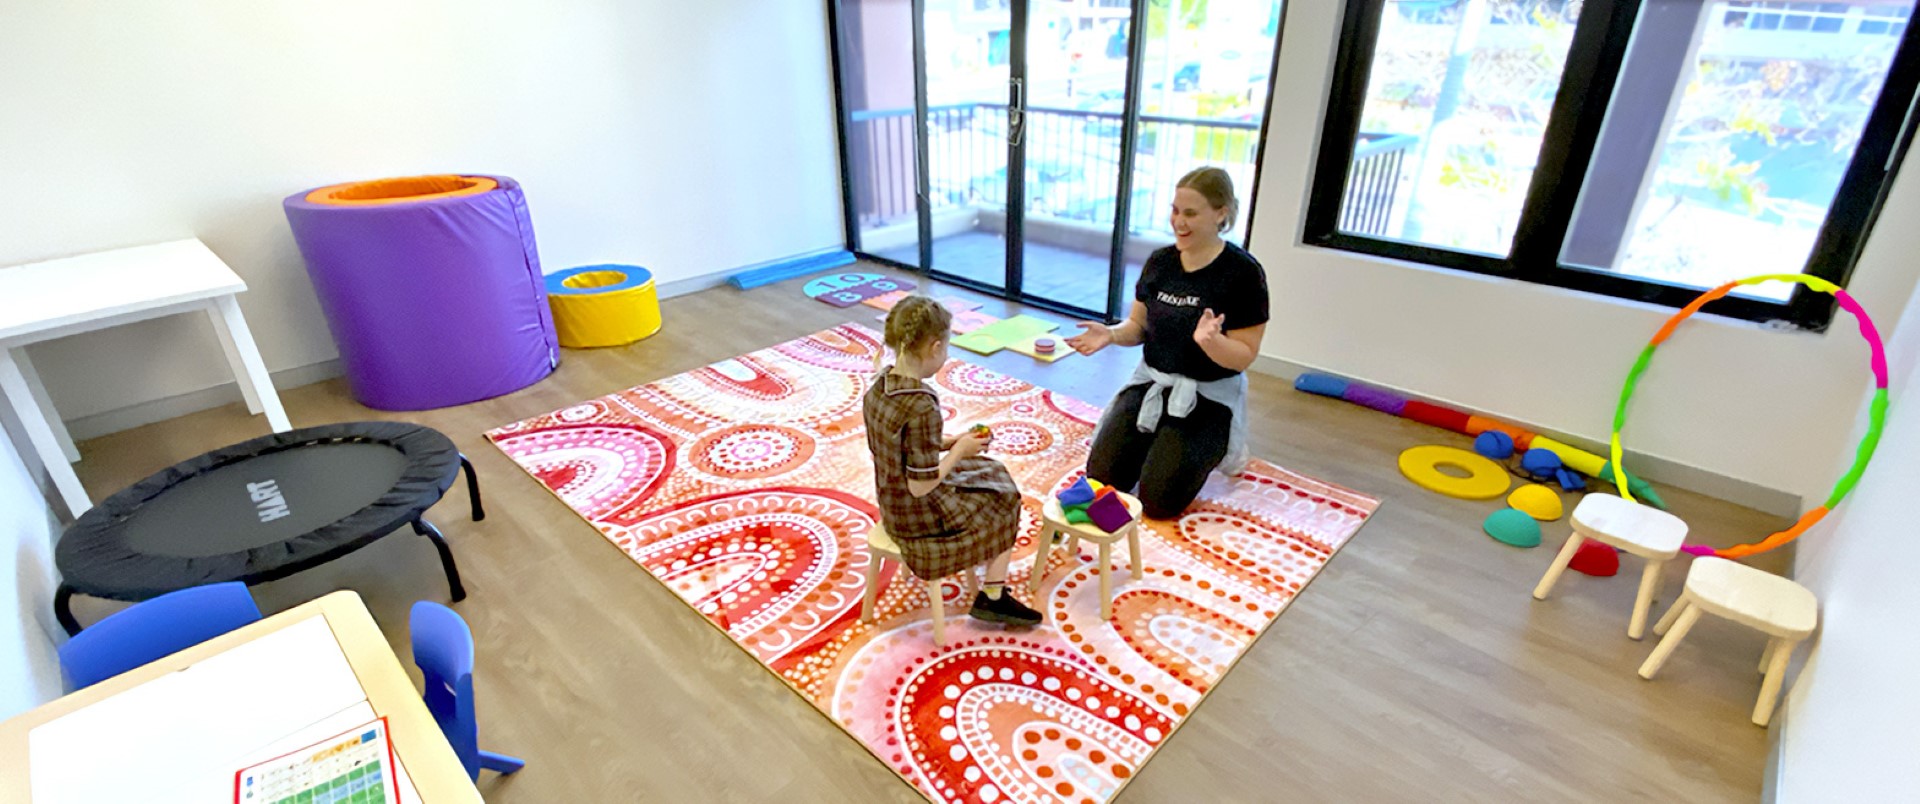 A young woman and a young girl play on a large rug in an Allied Health therapy room